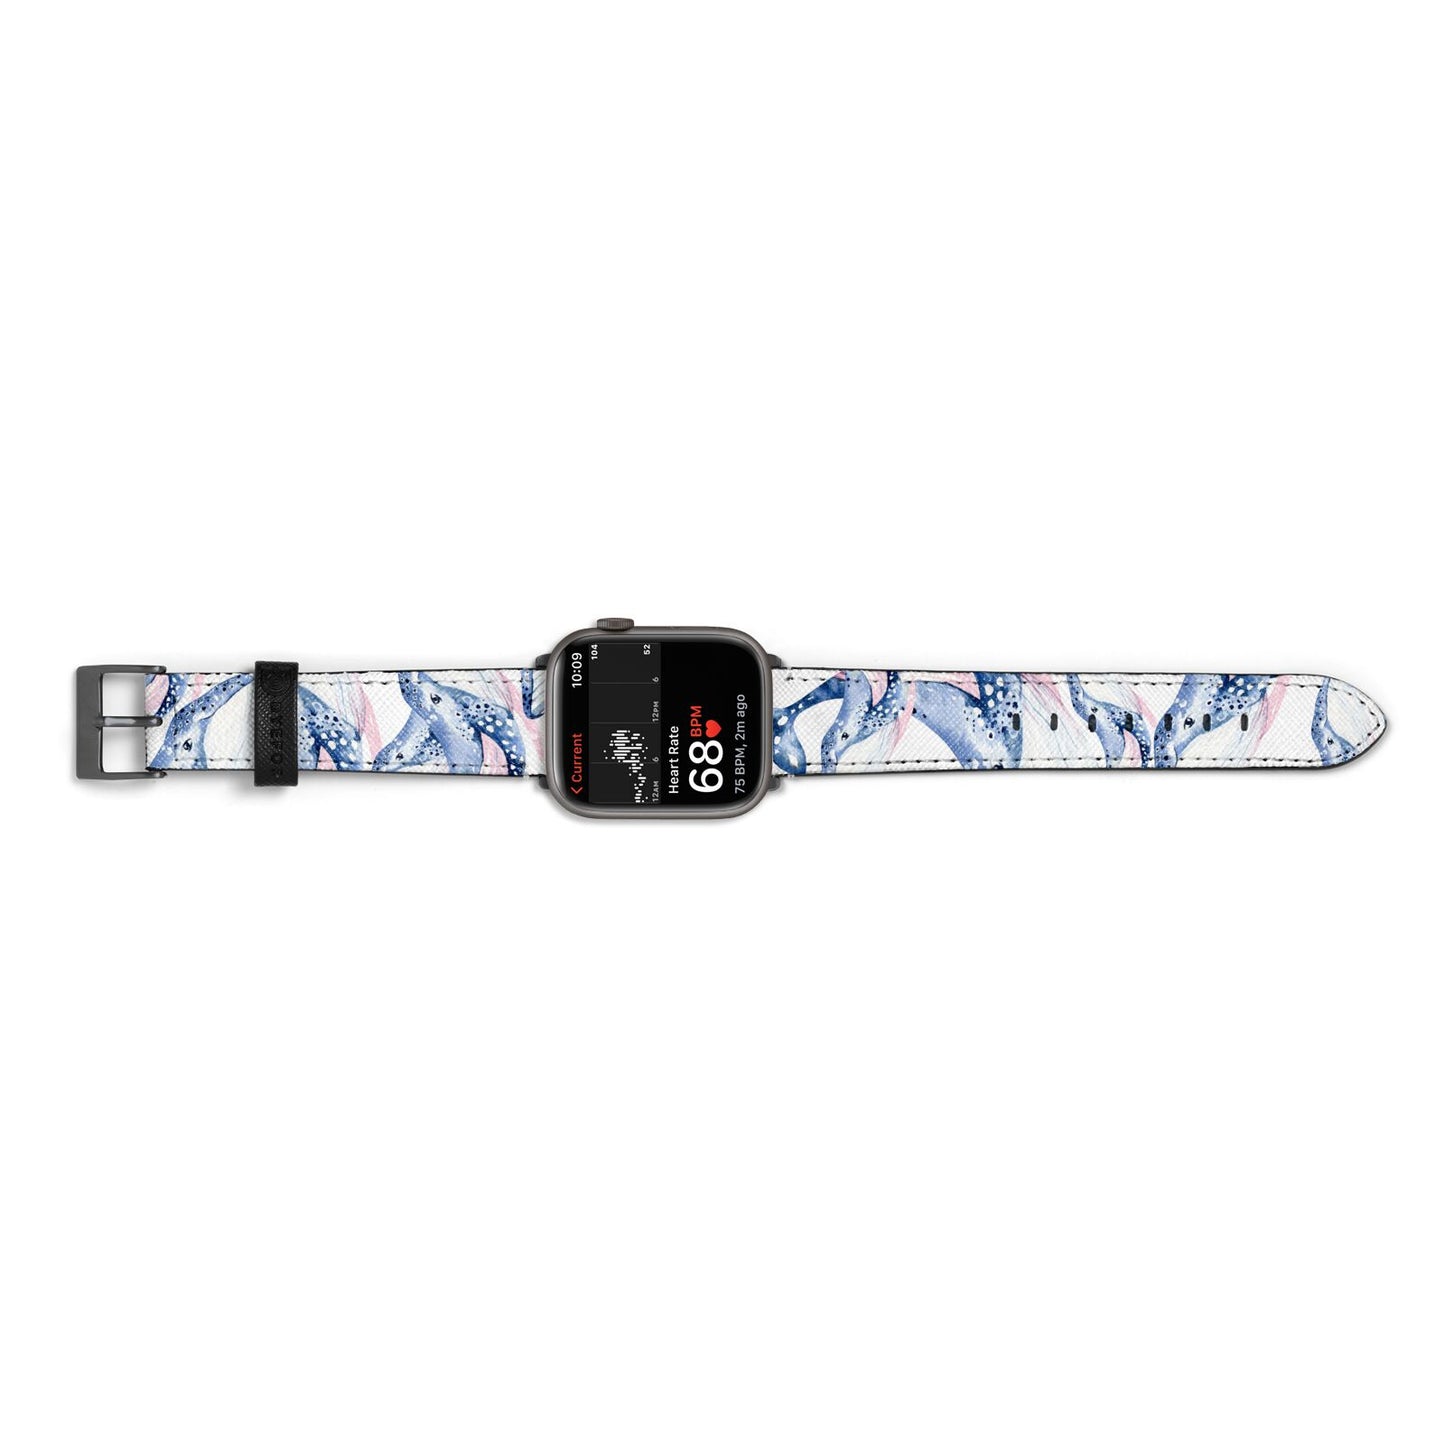 Whale Apple Watch Strap Size 38mm Landscape Image Space Grey Hardware